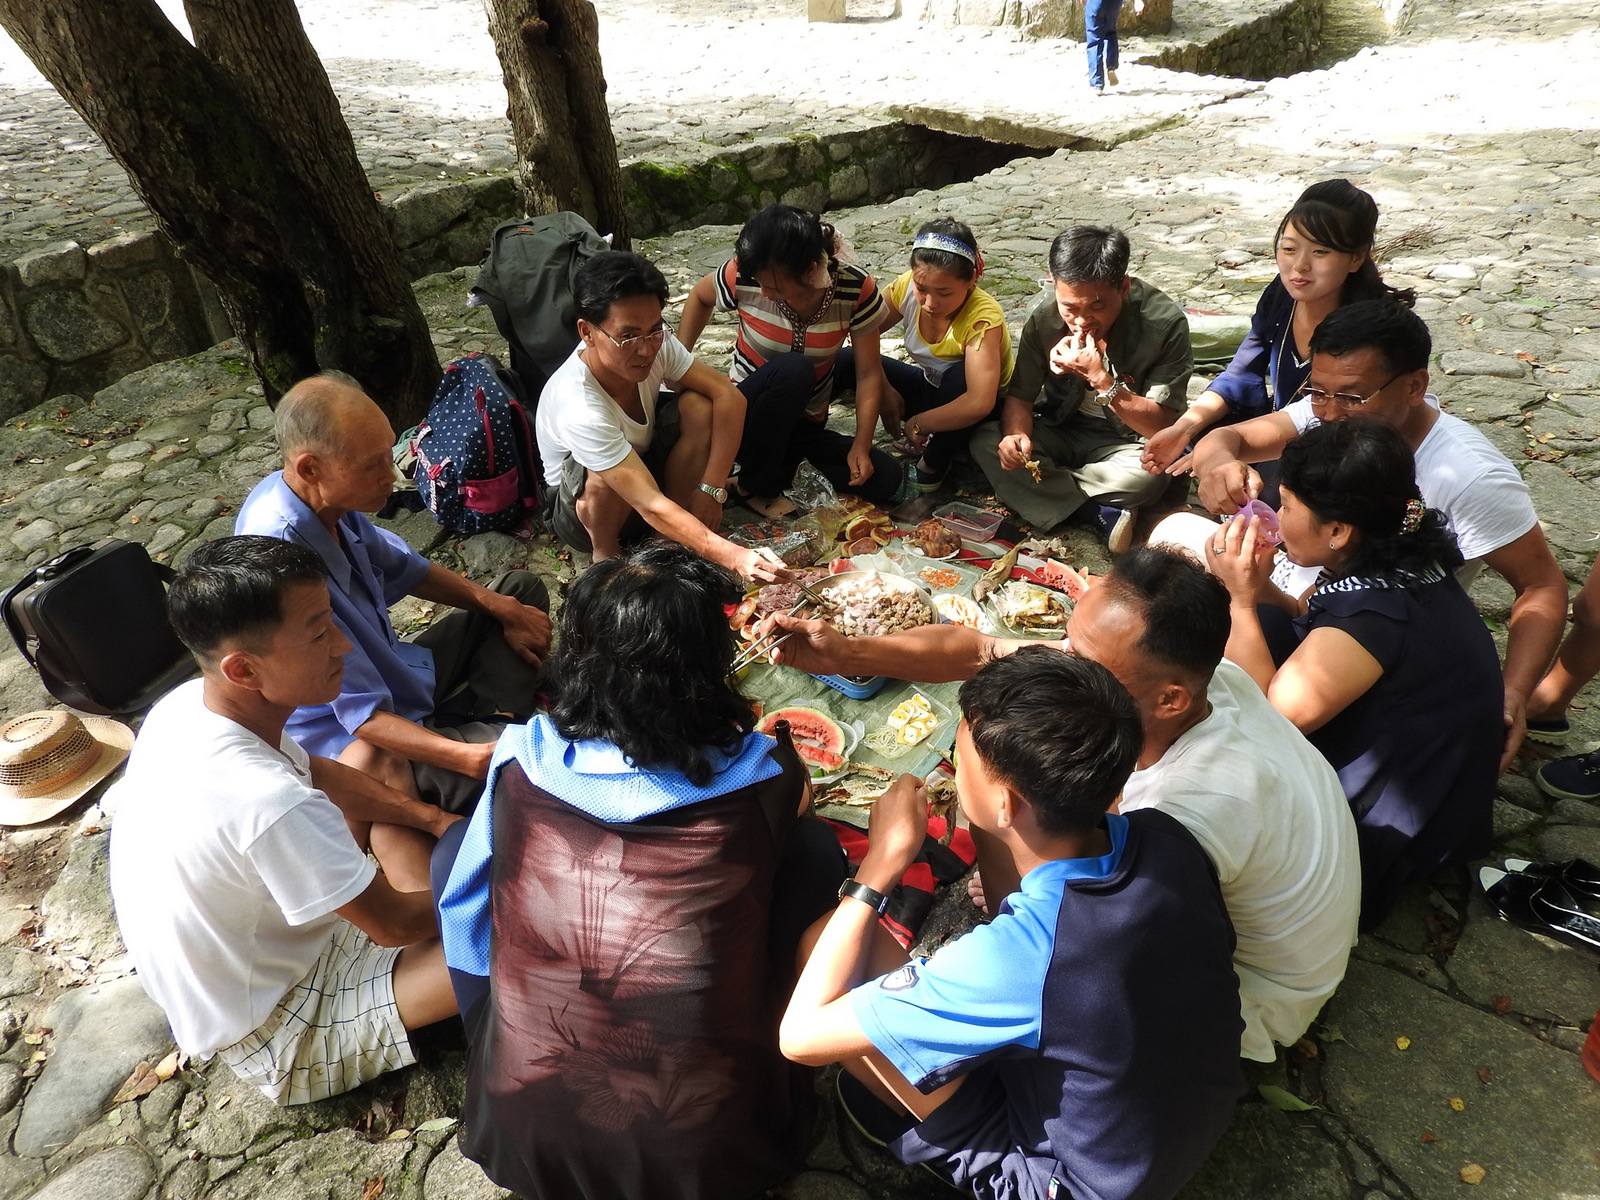 While walking up a path to the Pakyong Waterfall, over 100 km south of Pyongyang, I met a group of men and women grilling meat over a fire. At the waterfall, other picnickers ate grilled meat, fish, boiled eggs, kimbap (“Korean sushi”), and kimchi (fermented vegetables), drinking beer and soju (alcoholic drink). Having lived in South Korea, this scene is one I saw countless times along the sea or in the mountains.